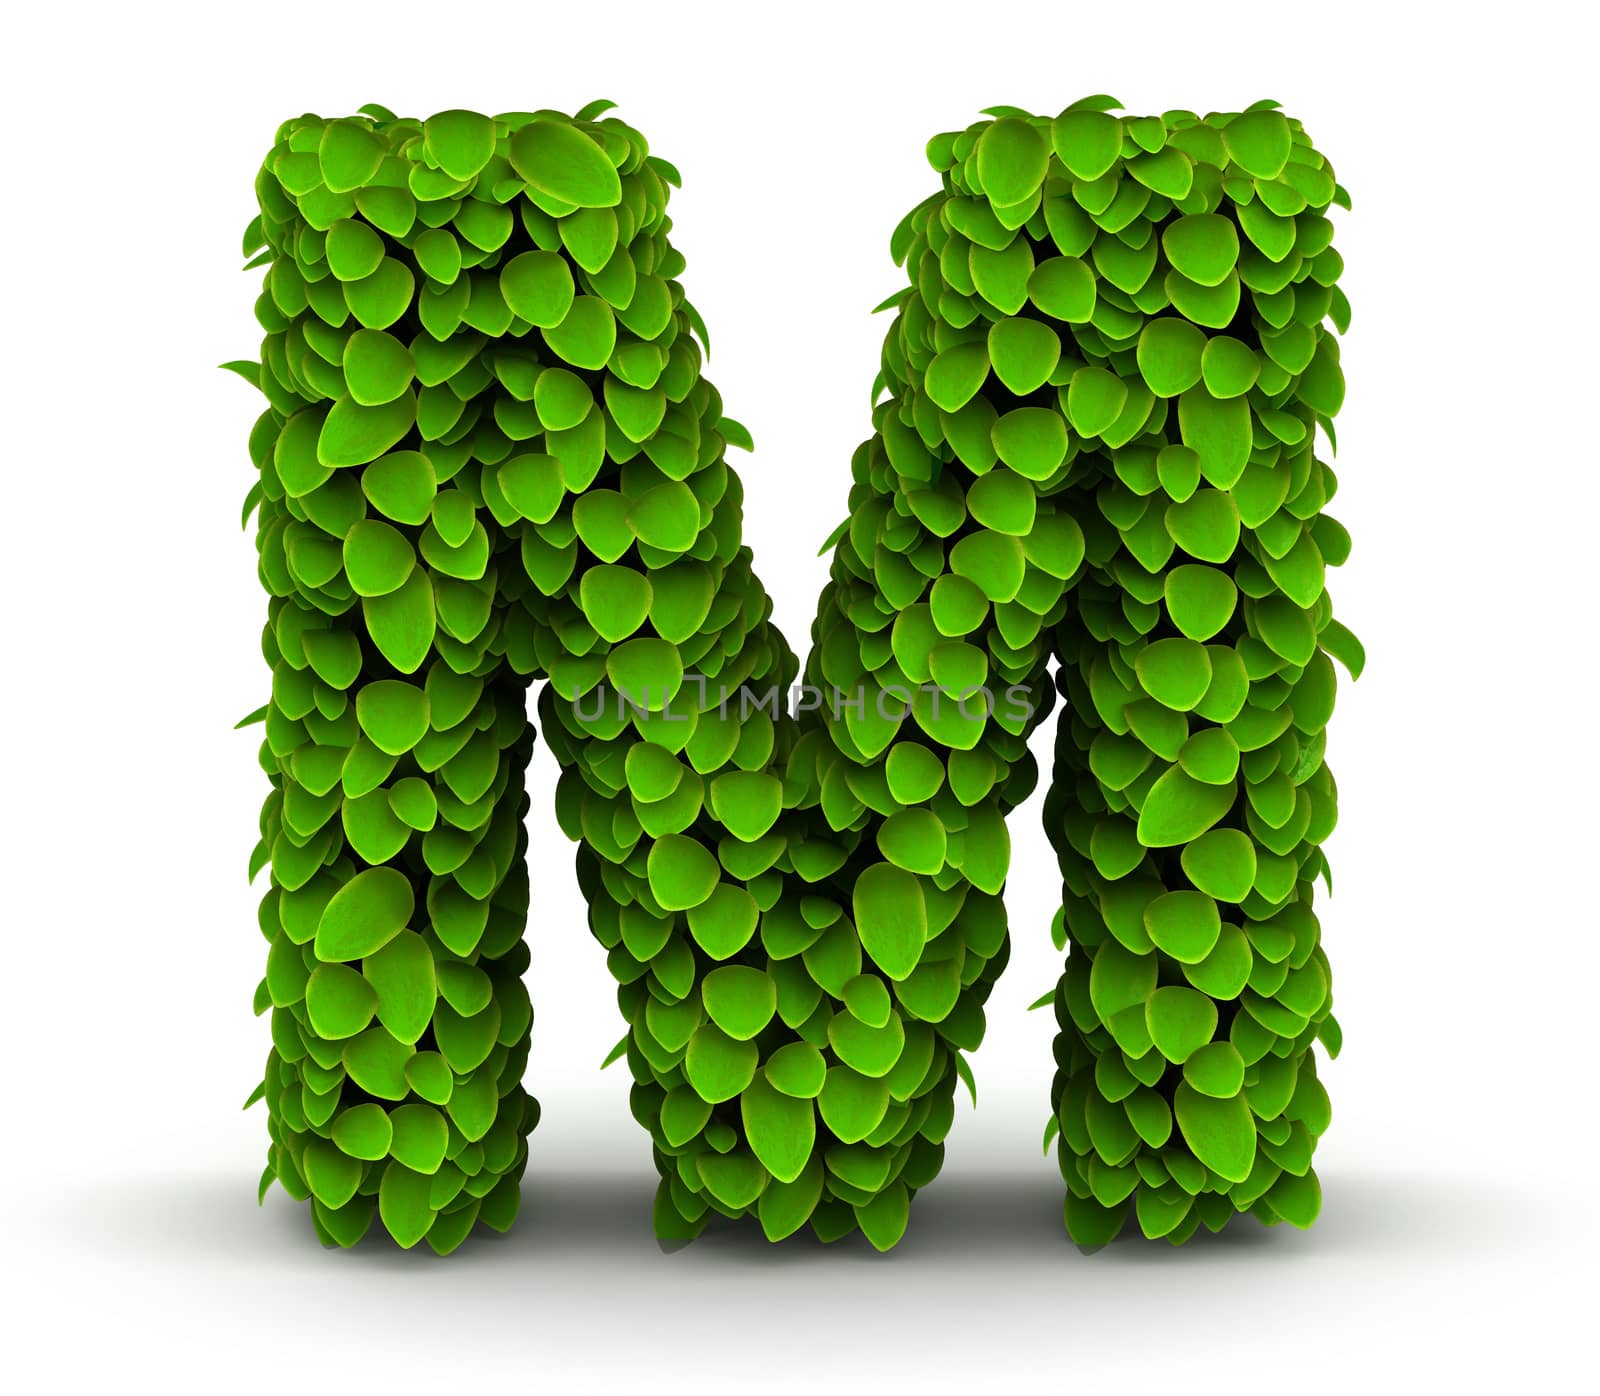 Leaves font letter M by iunewind